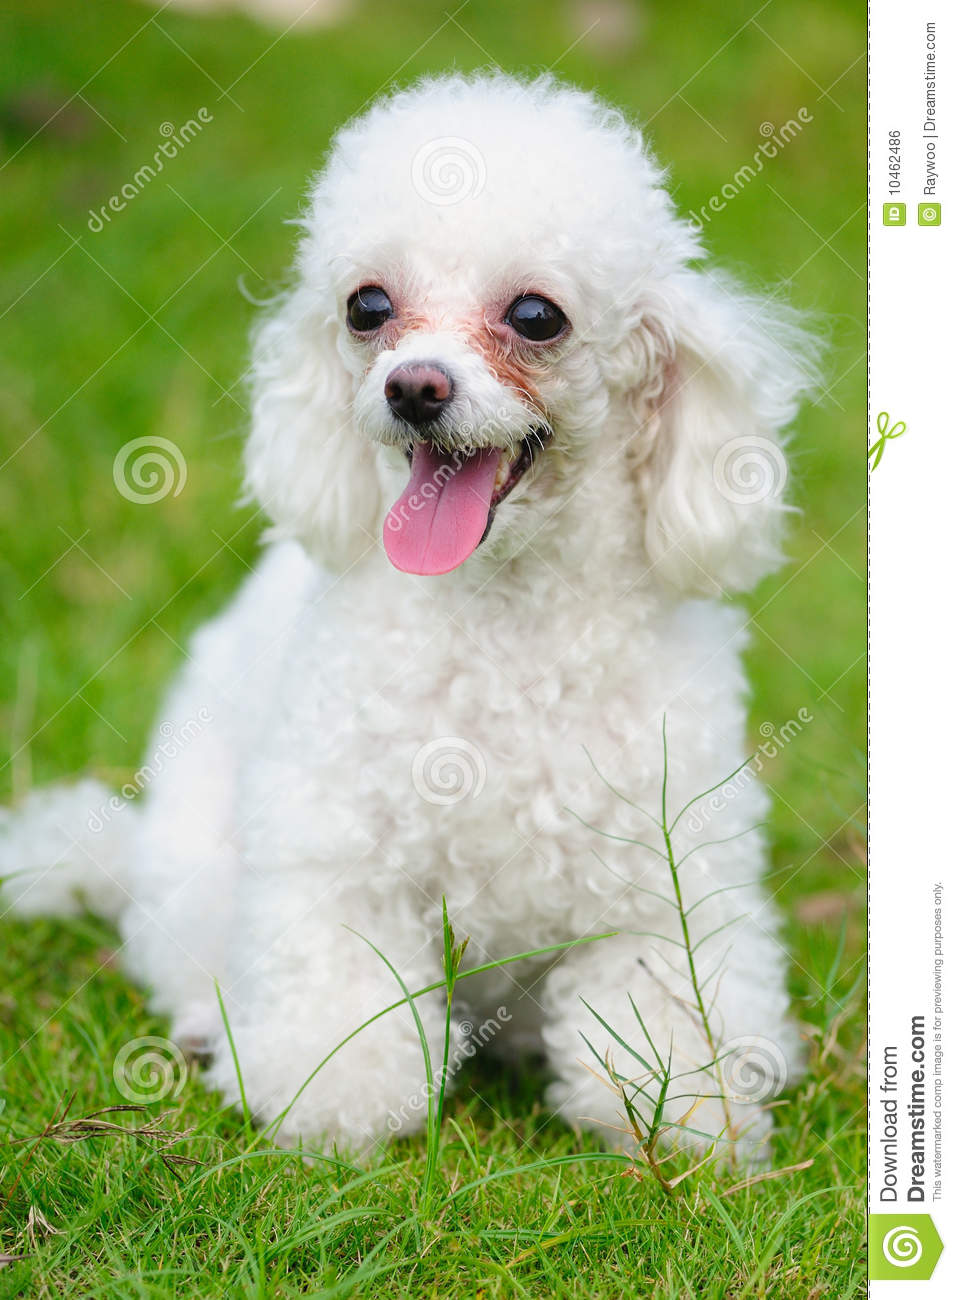 Cute White Poodle Puppy